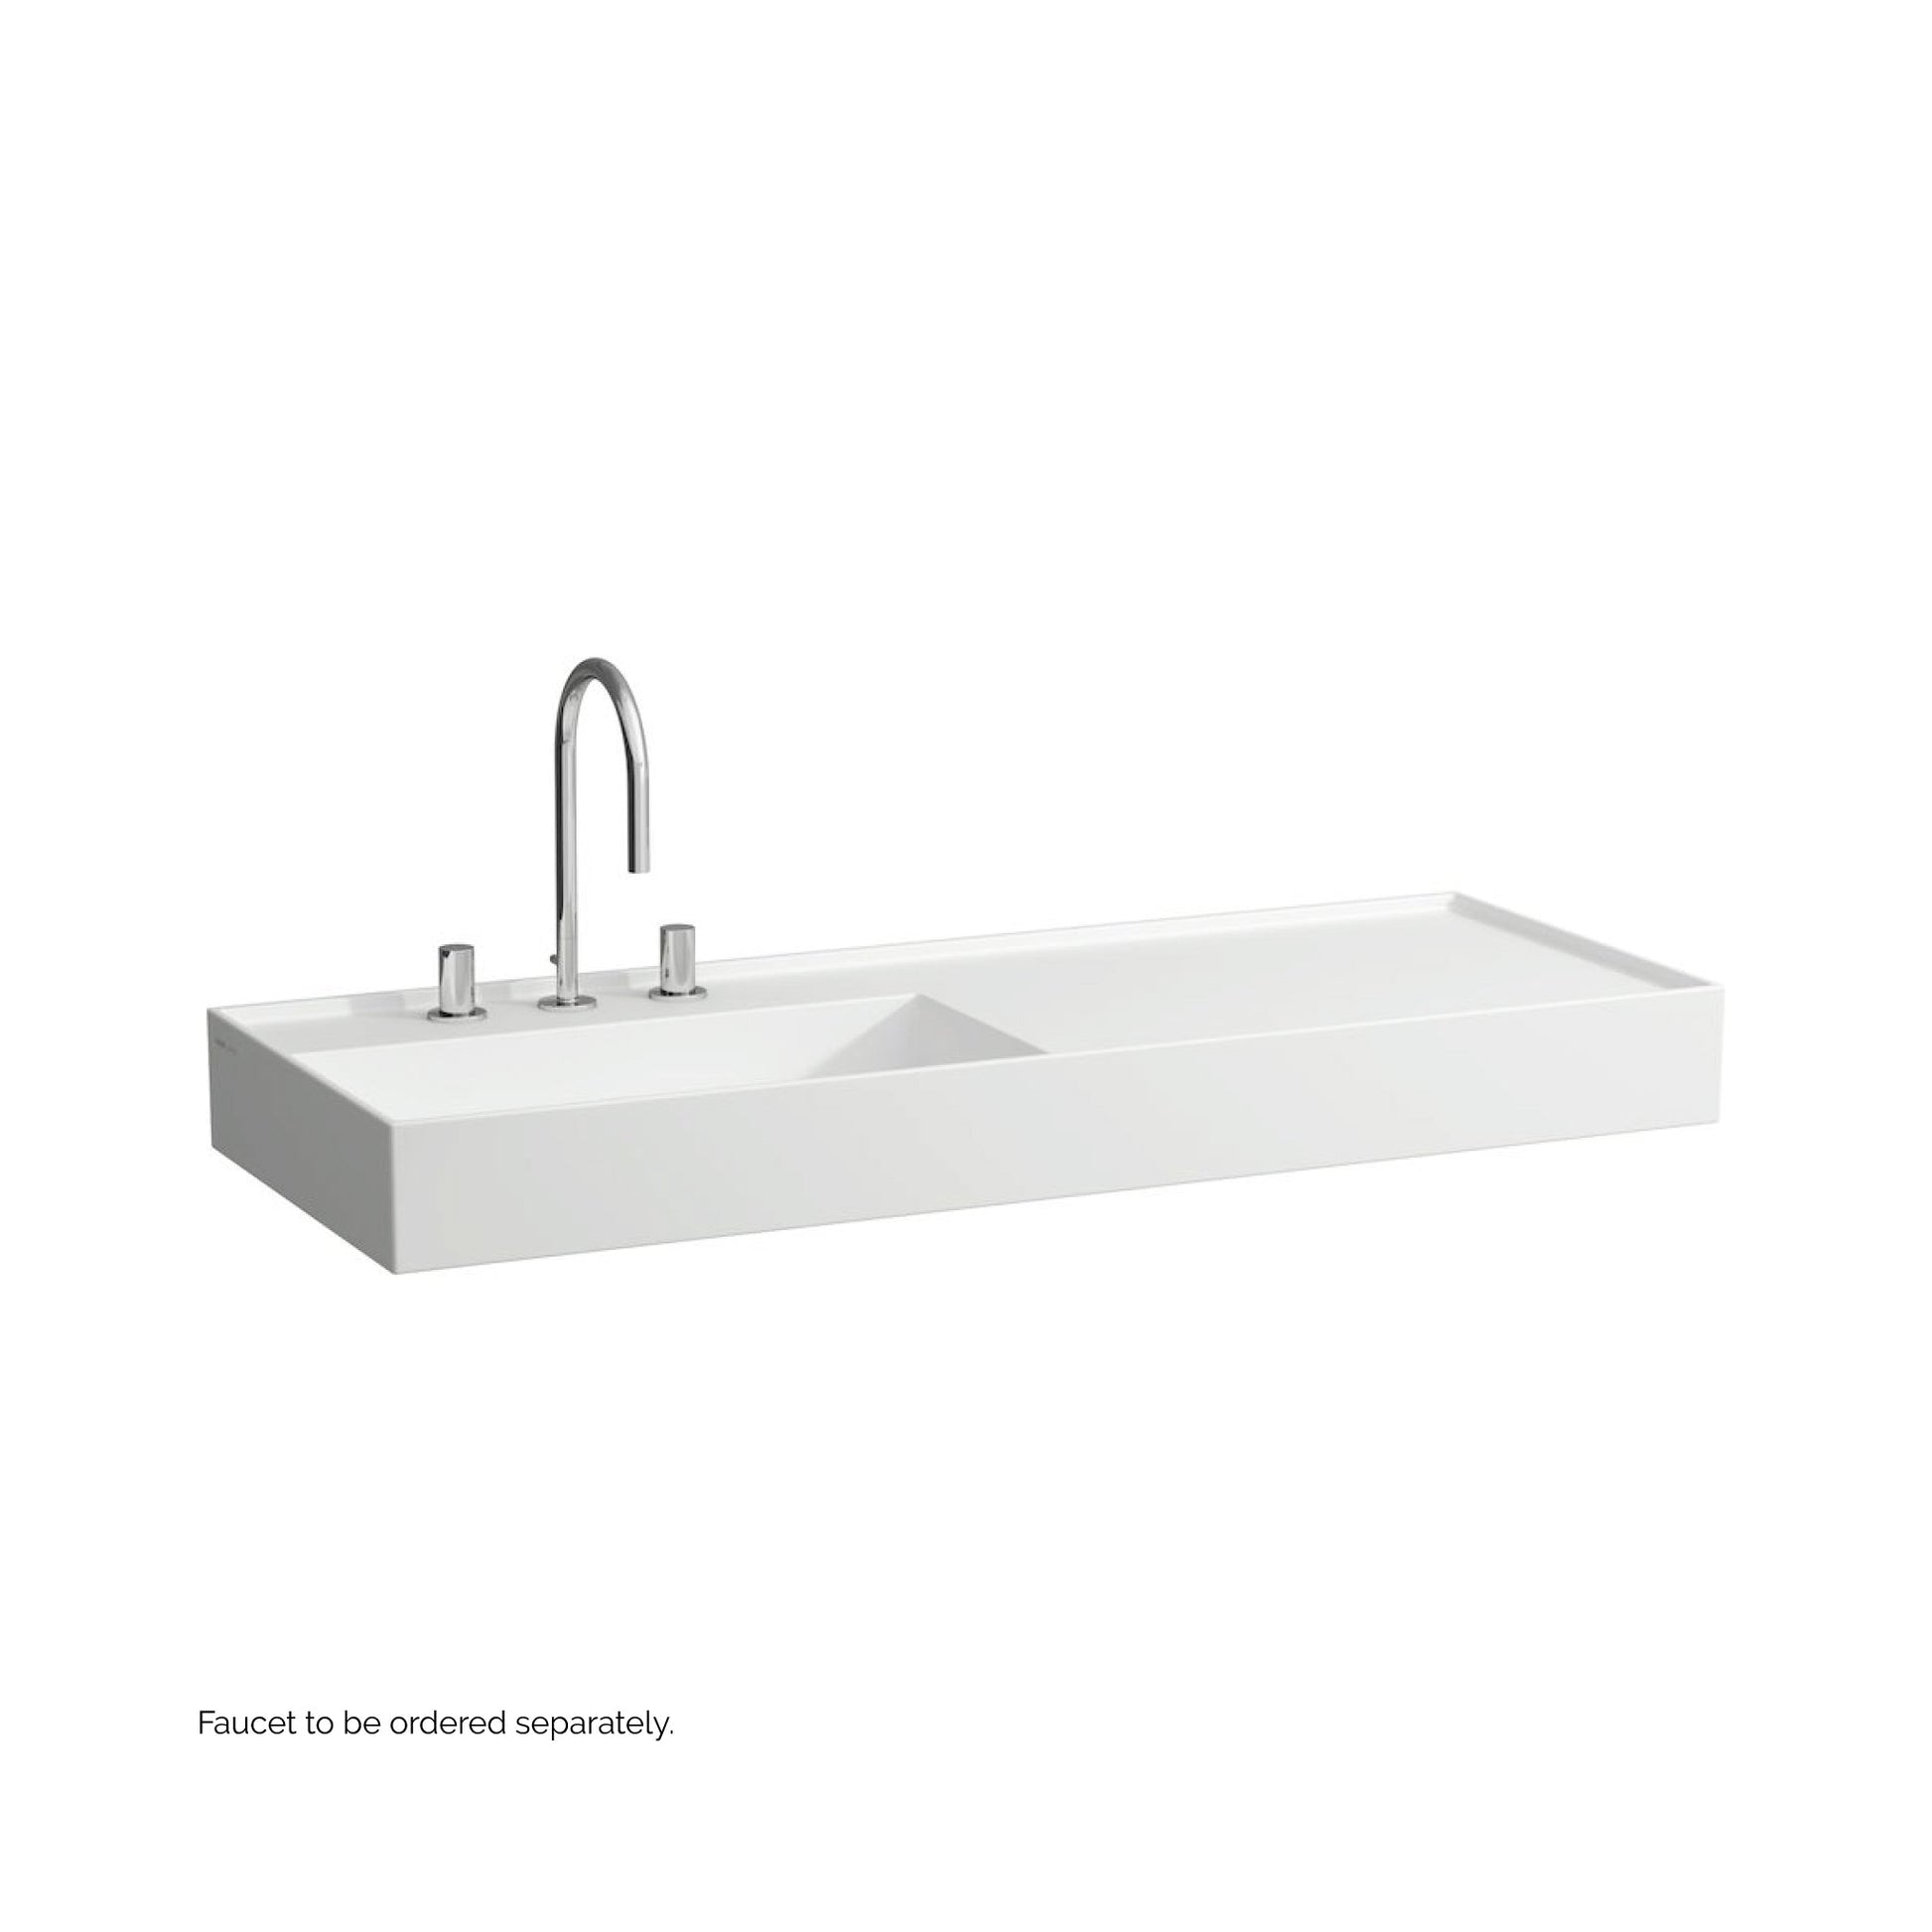 Laufen Kartell 47" x 18" Matte White Wall-Mounted Shelf-Right Bathroom Sink With 3 Faucet Holes